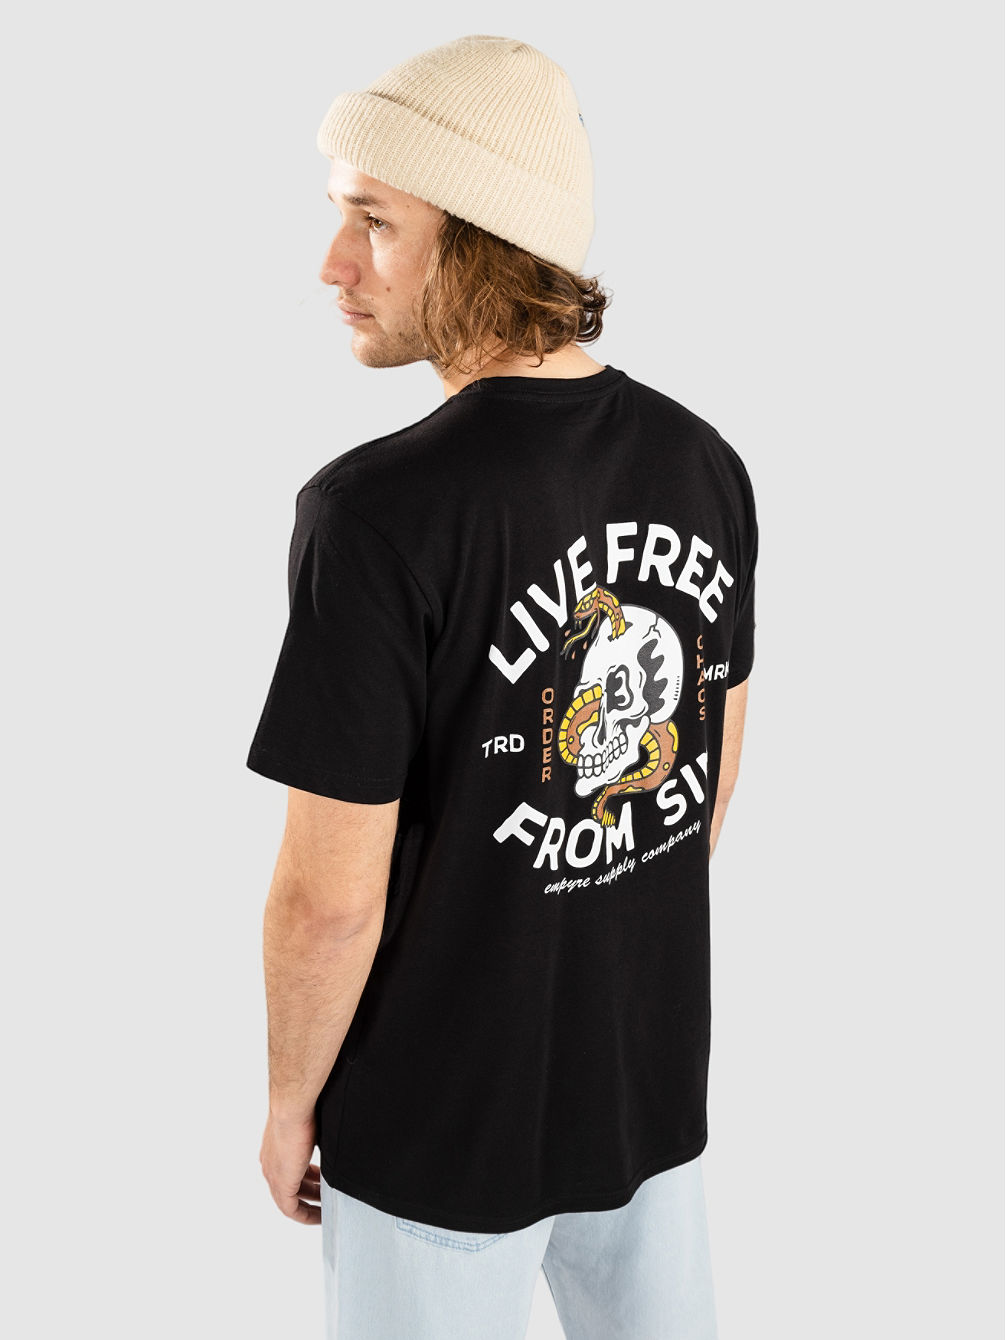 Love Free From Sin T-Shirt